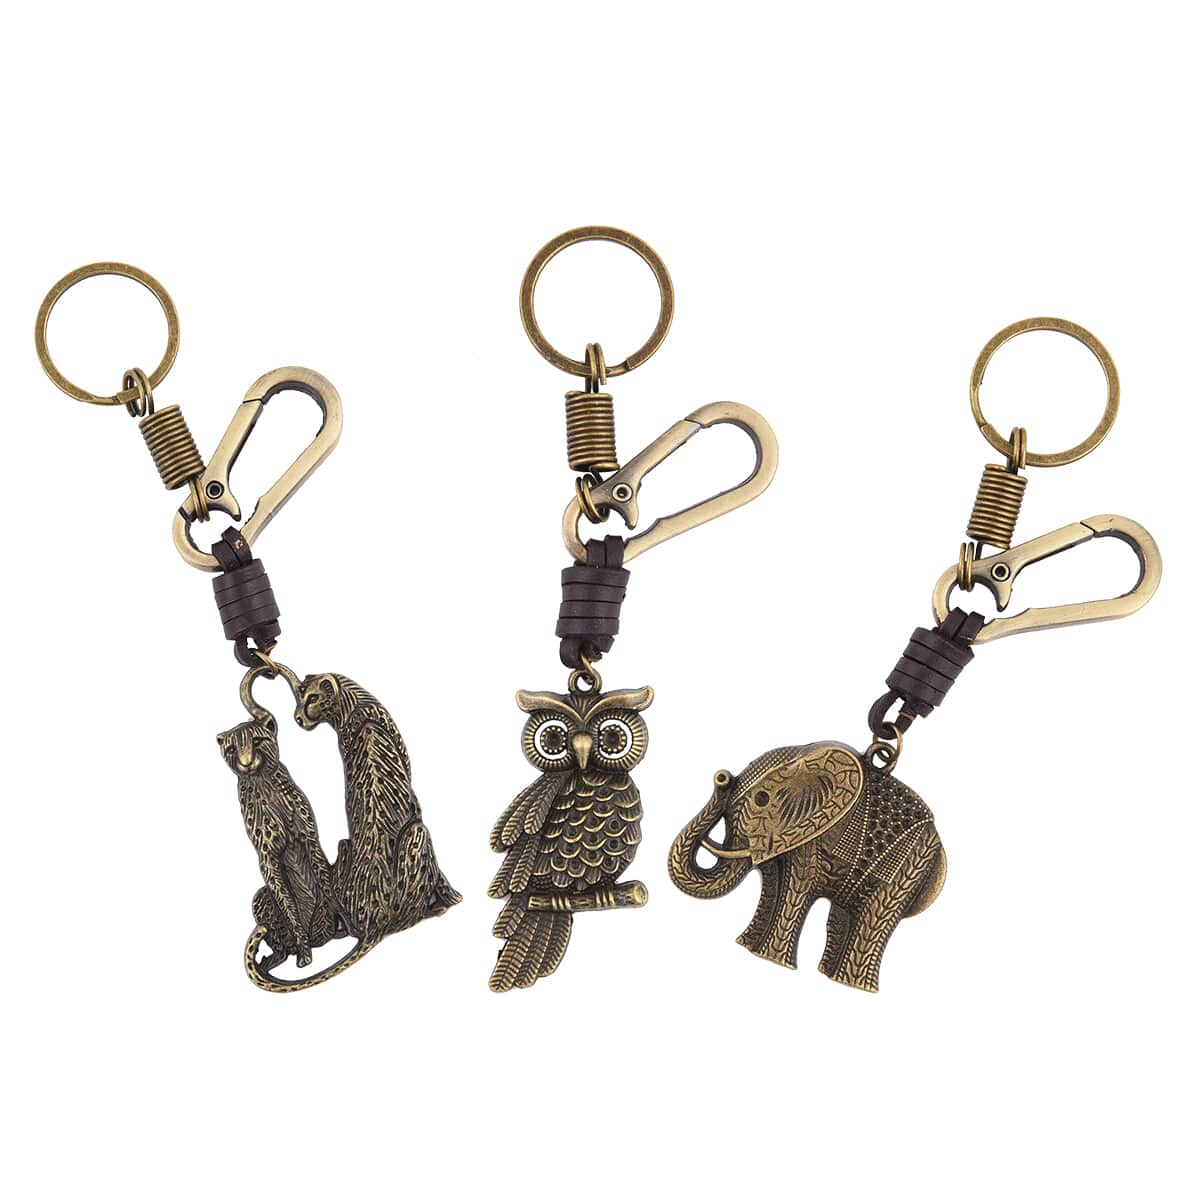 Set of 3 Keychain in Faux Leather and Goldtone - Leopard, Owl and Elephant Shape image number 0